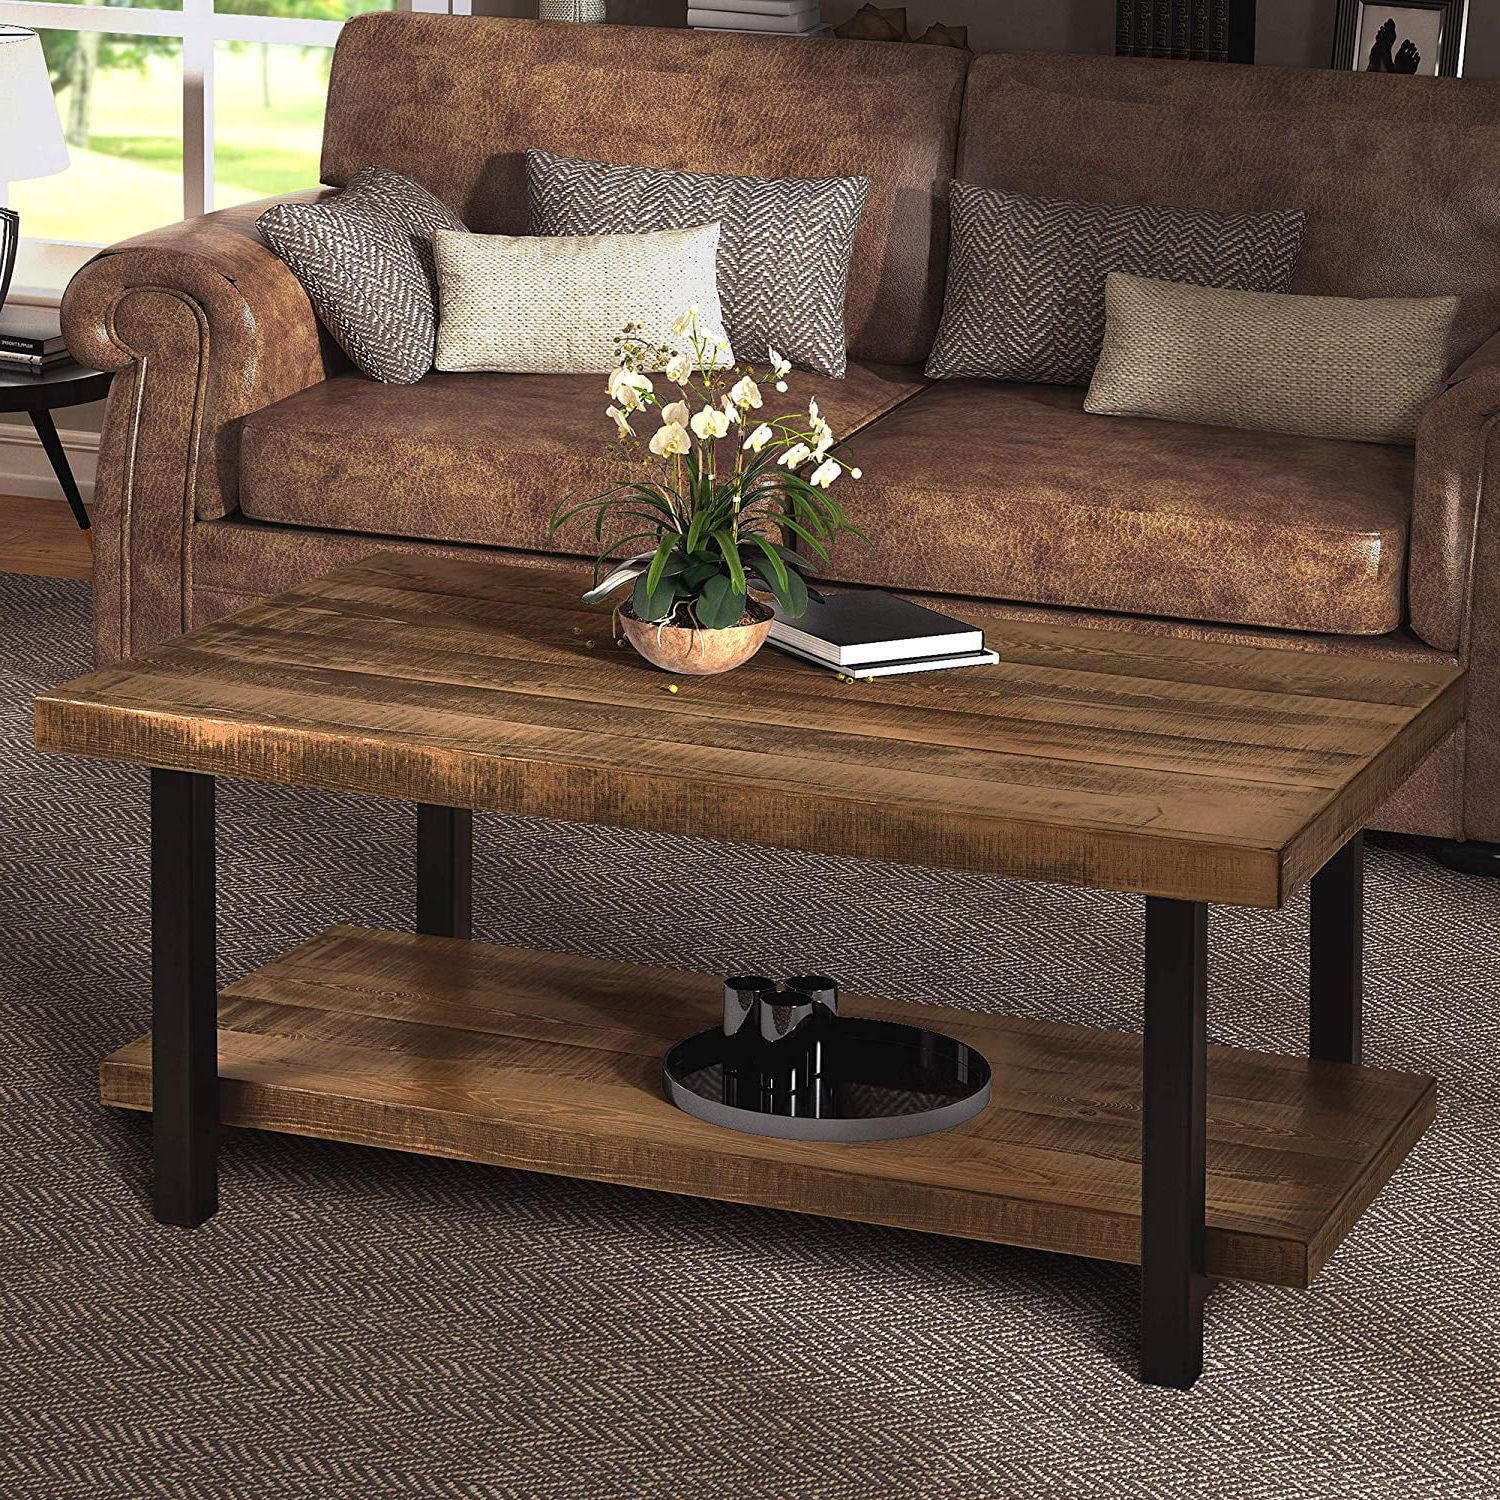 Harper&bright Designs Industrial Rectangular Pine Wood Coffee Table For Most Popular Brown Rustic Coffee Tables (View 8 of 15)